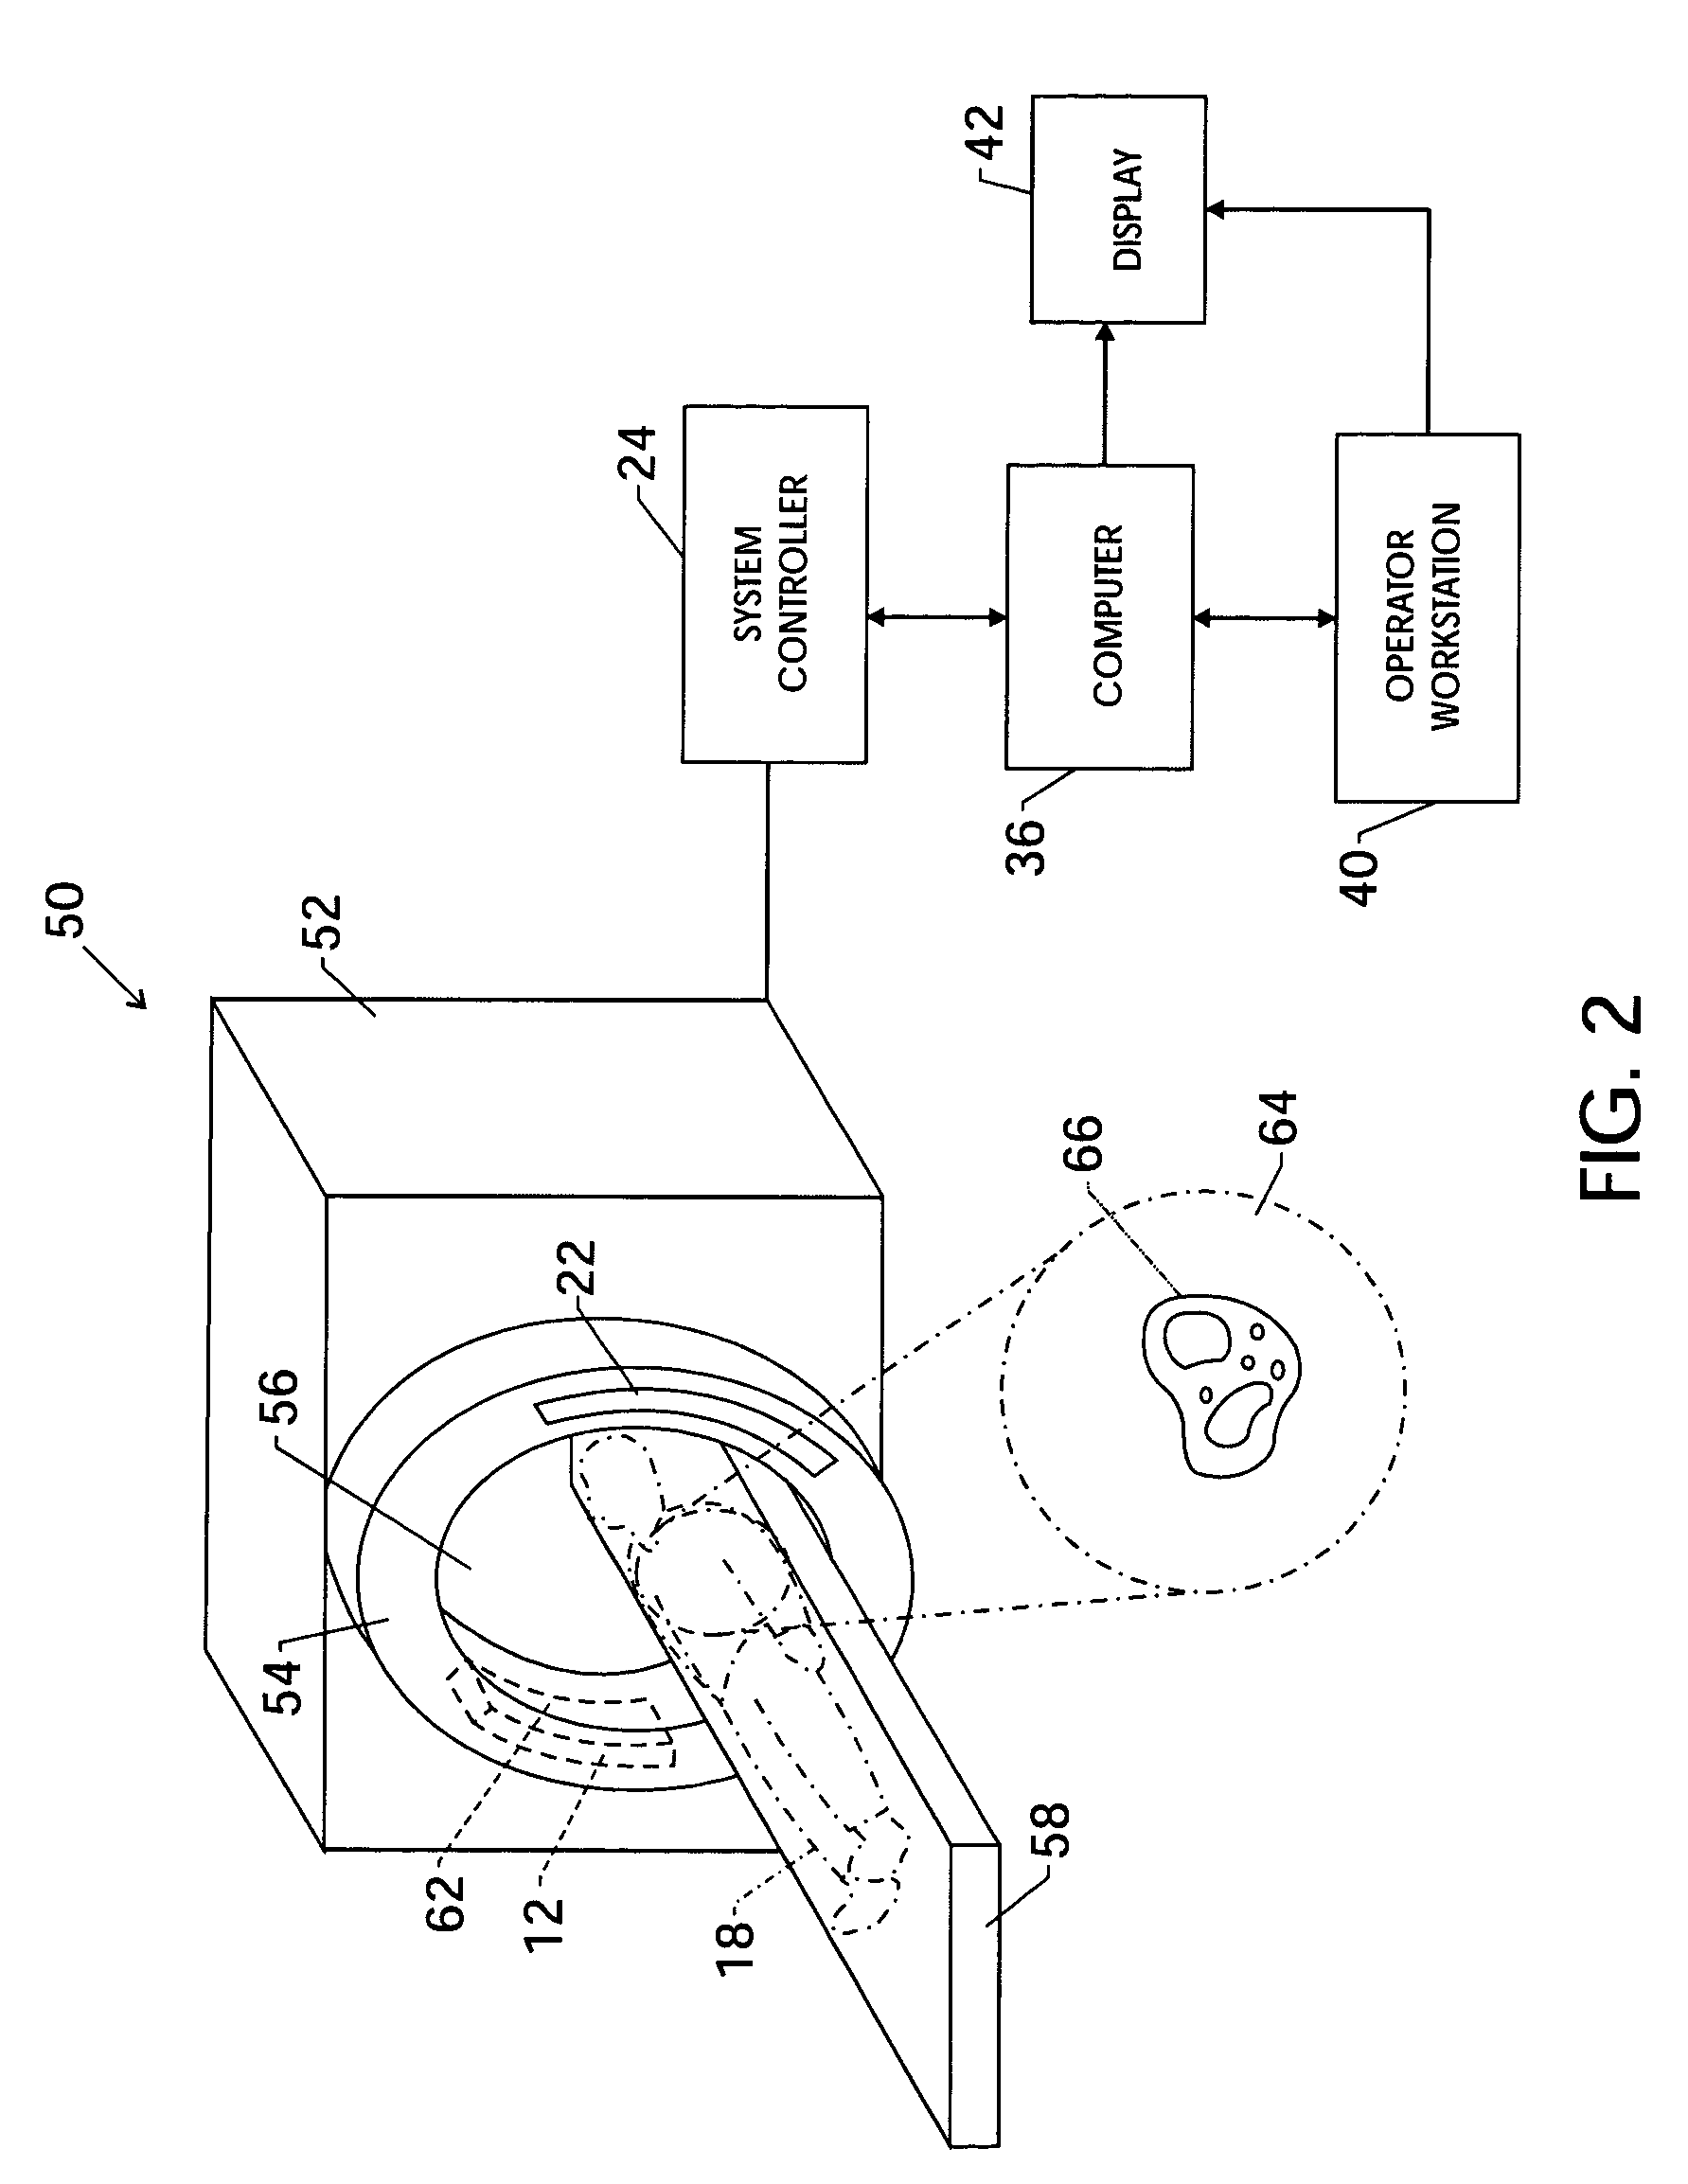 Method and apparatus for correcting motion in image reconstruction